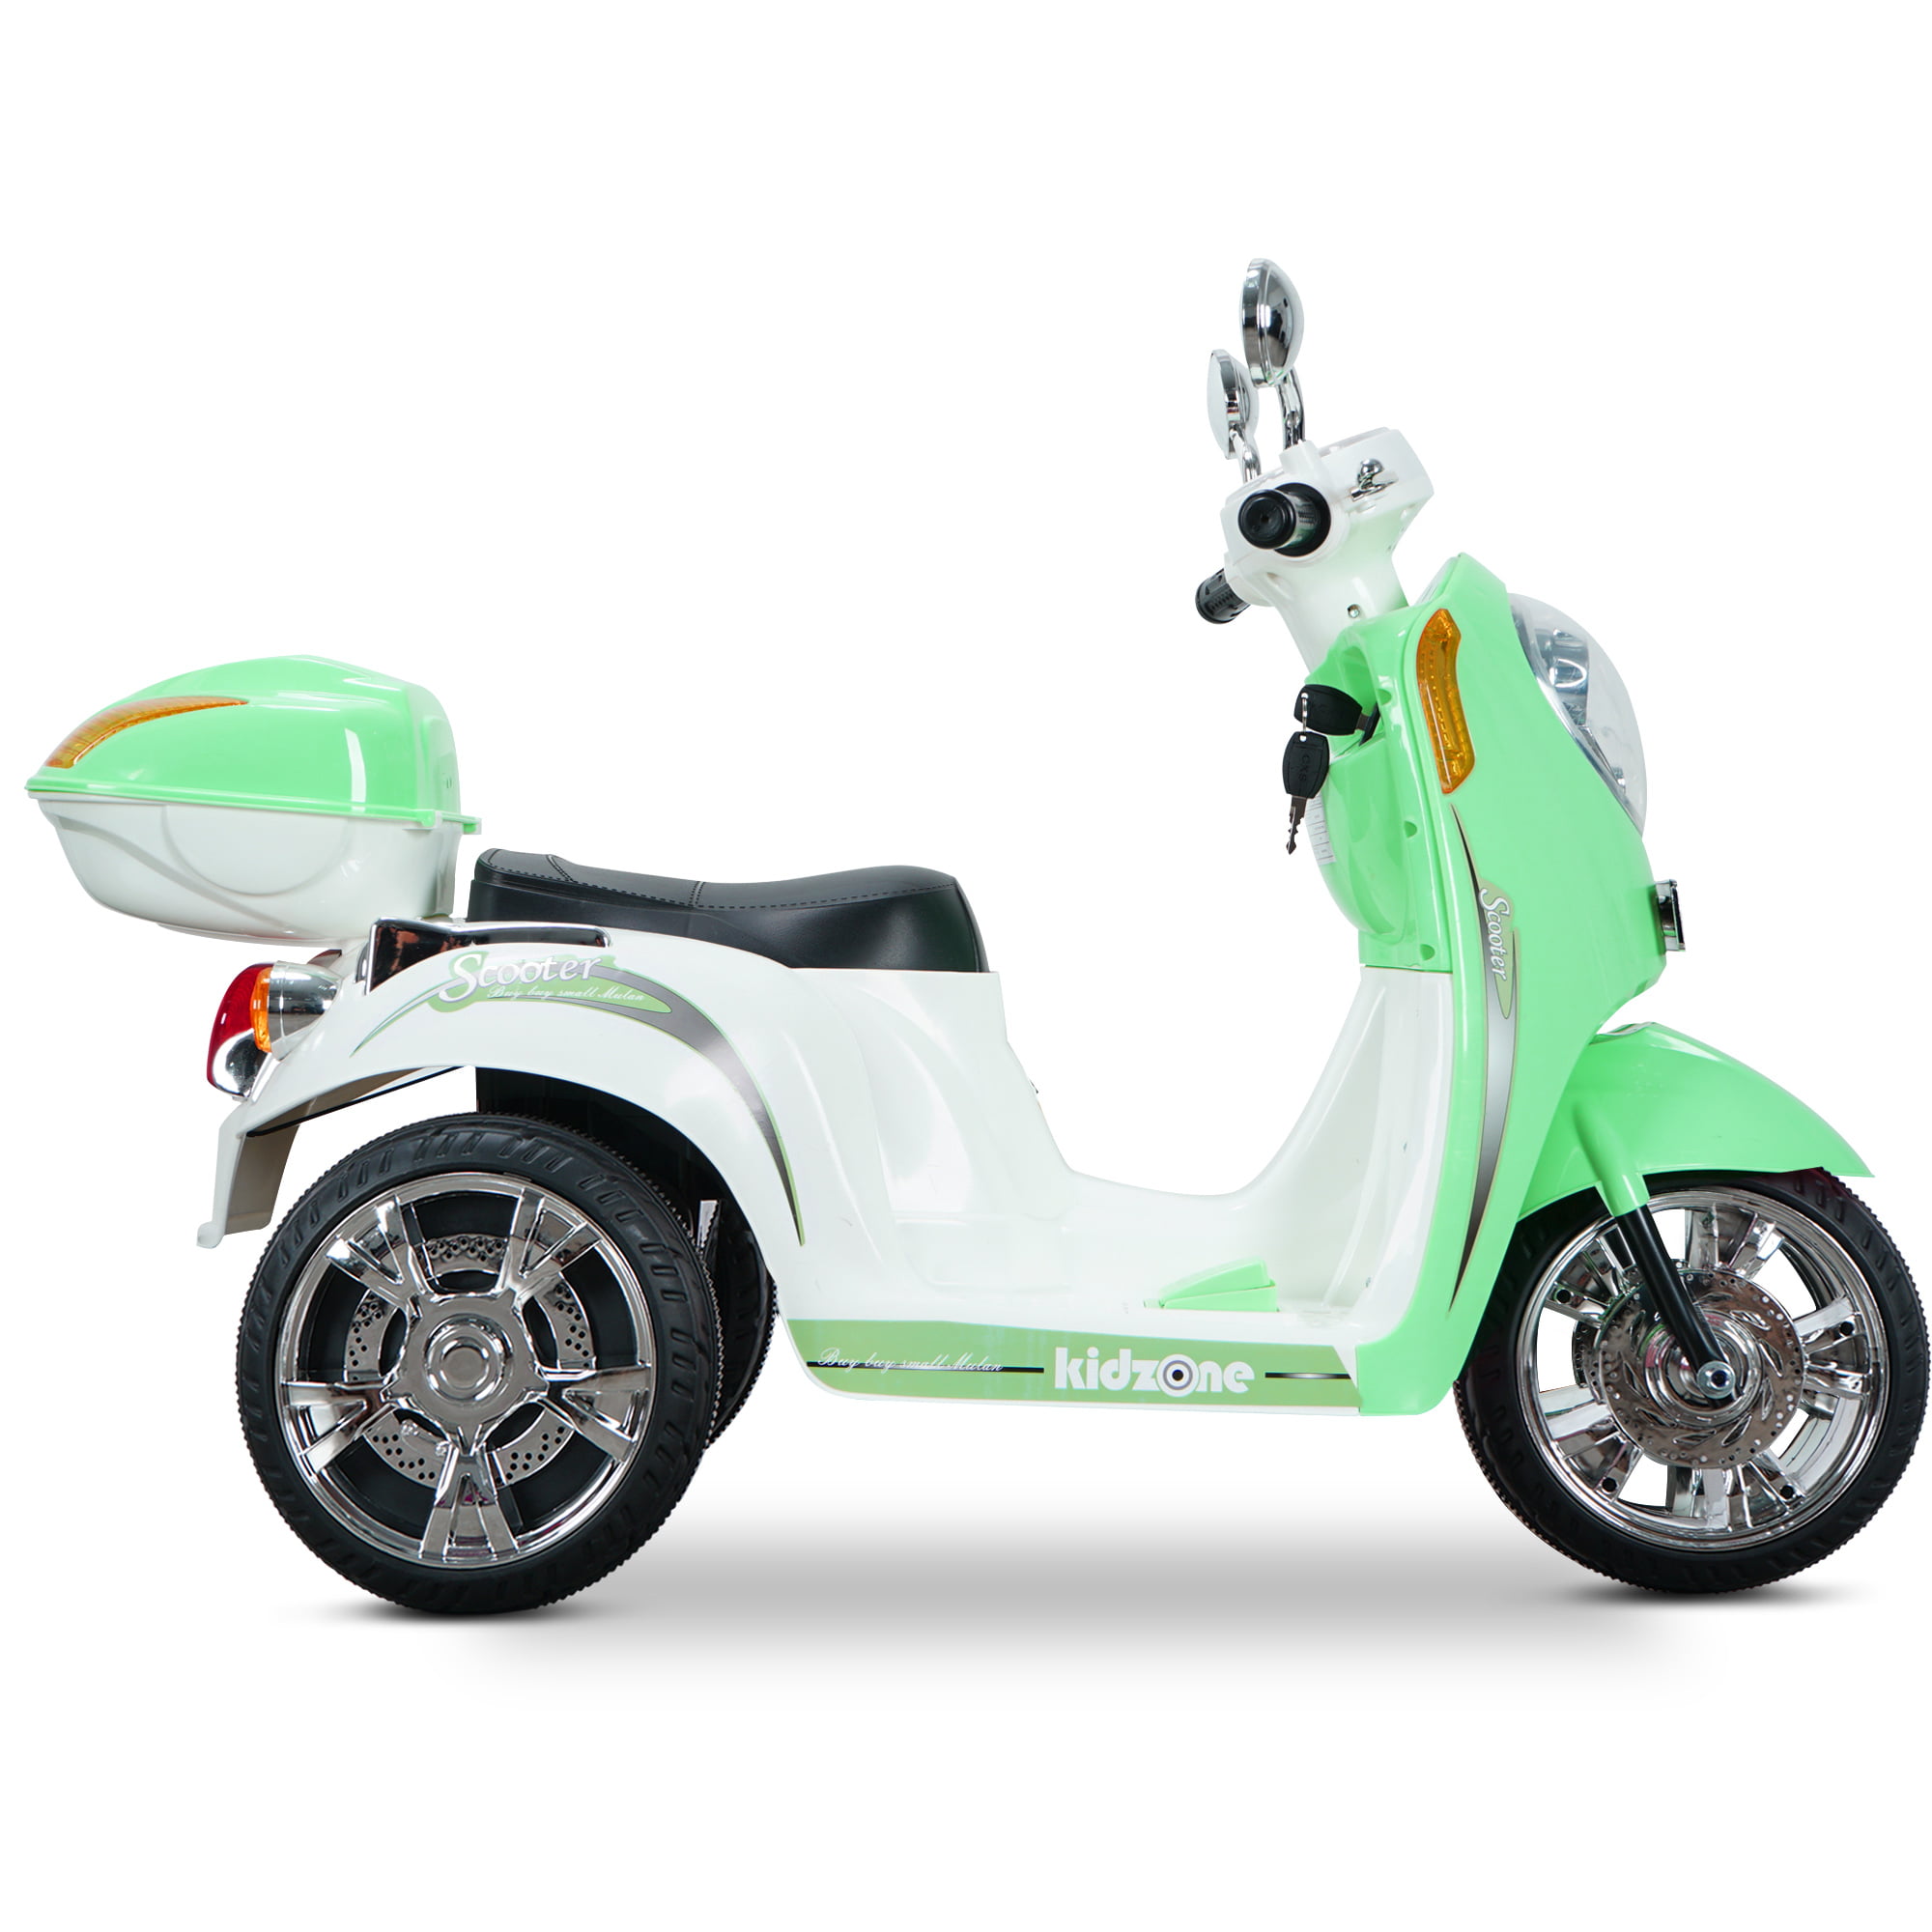 small scooter toy